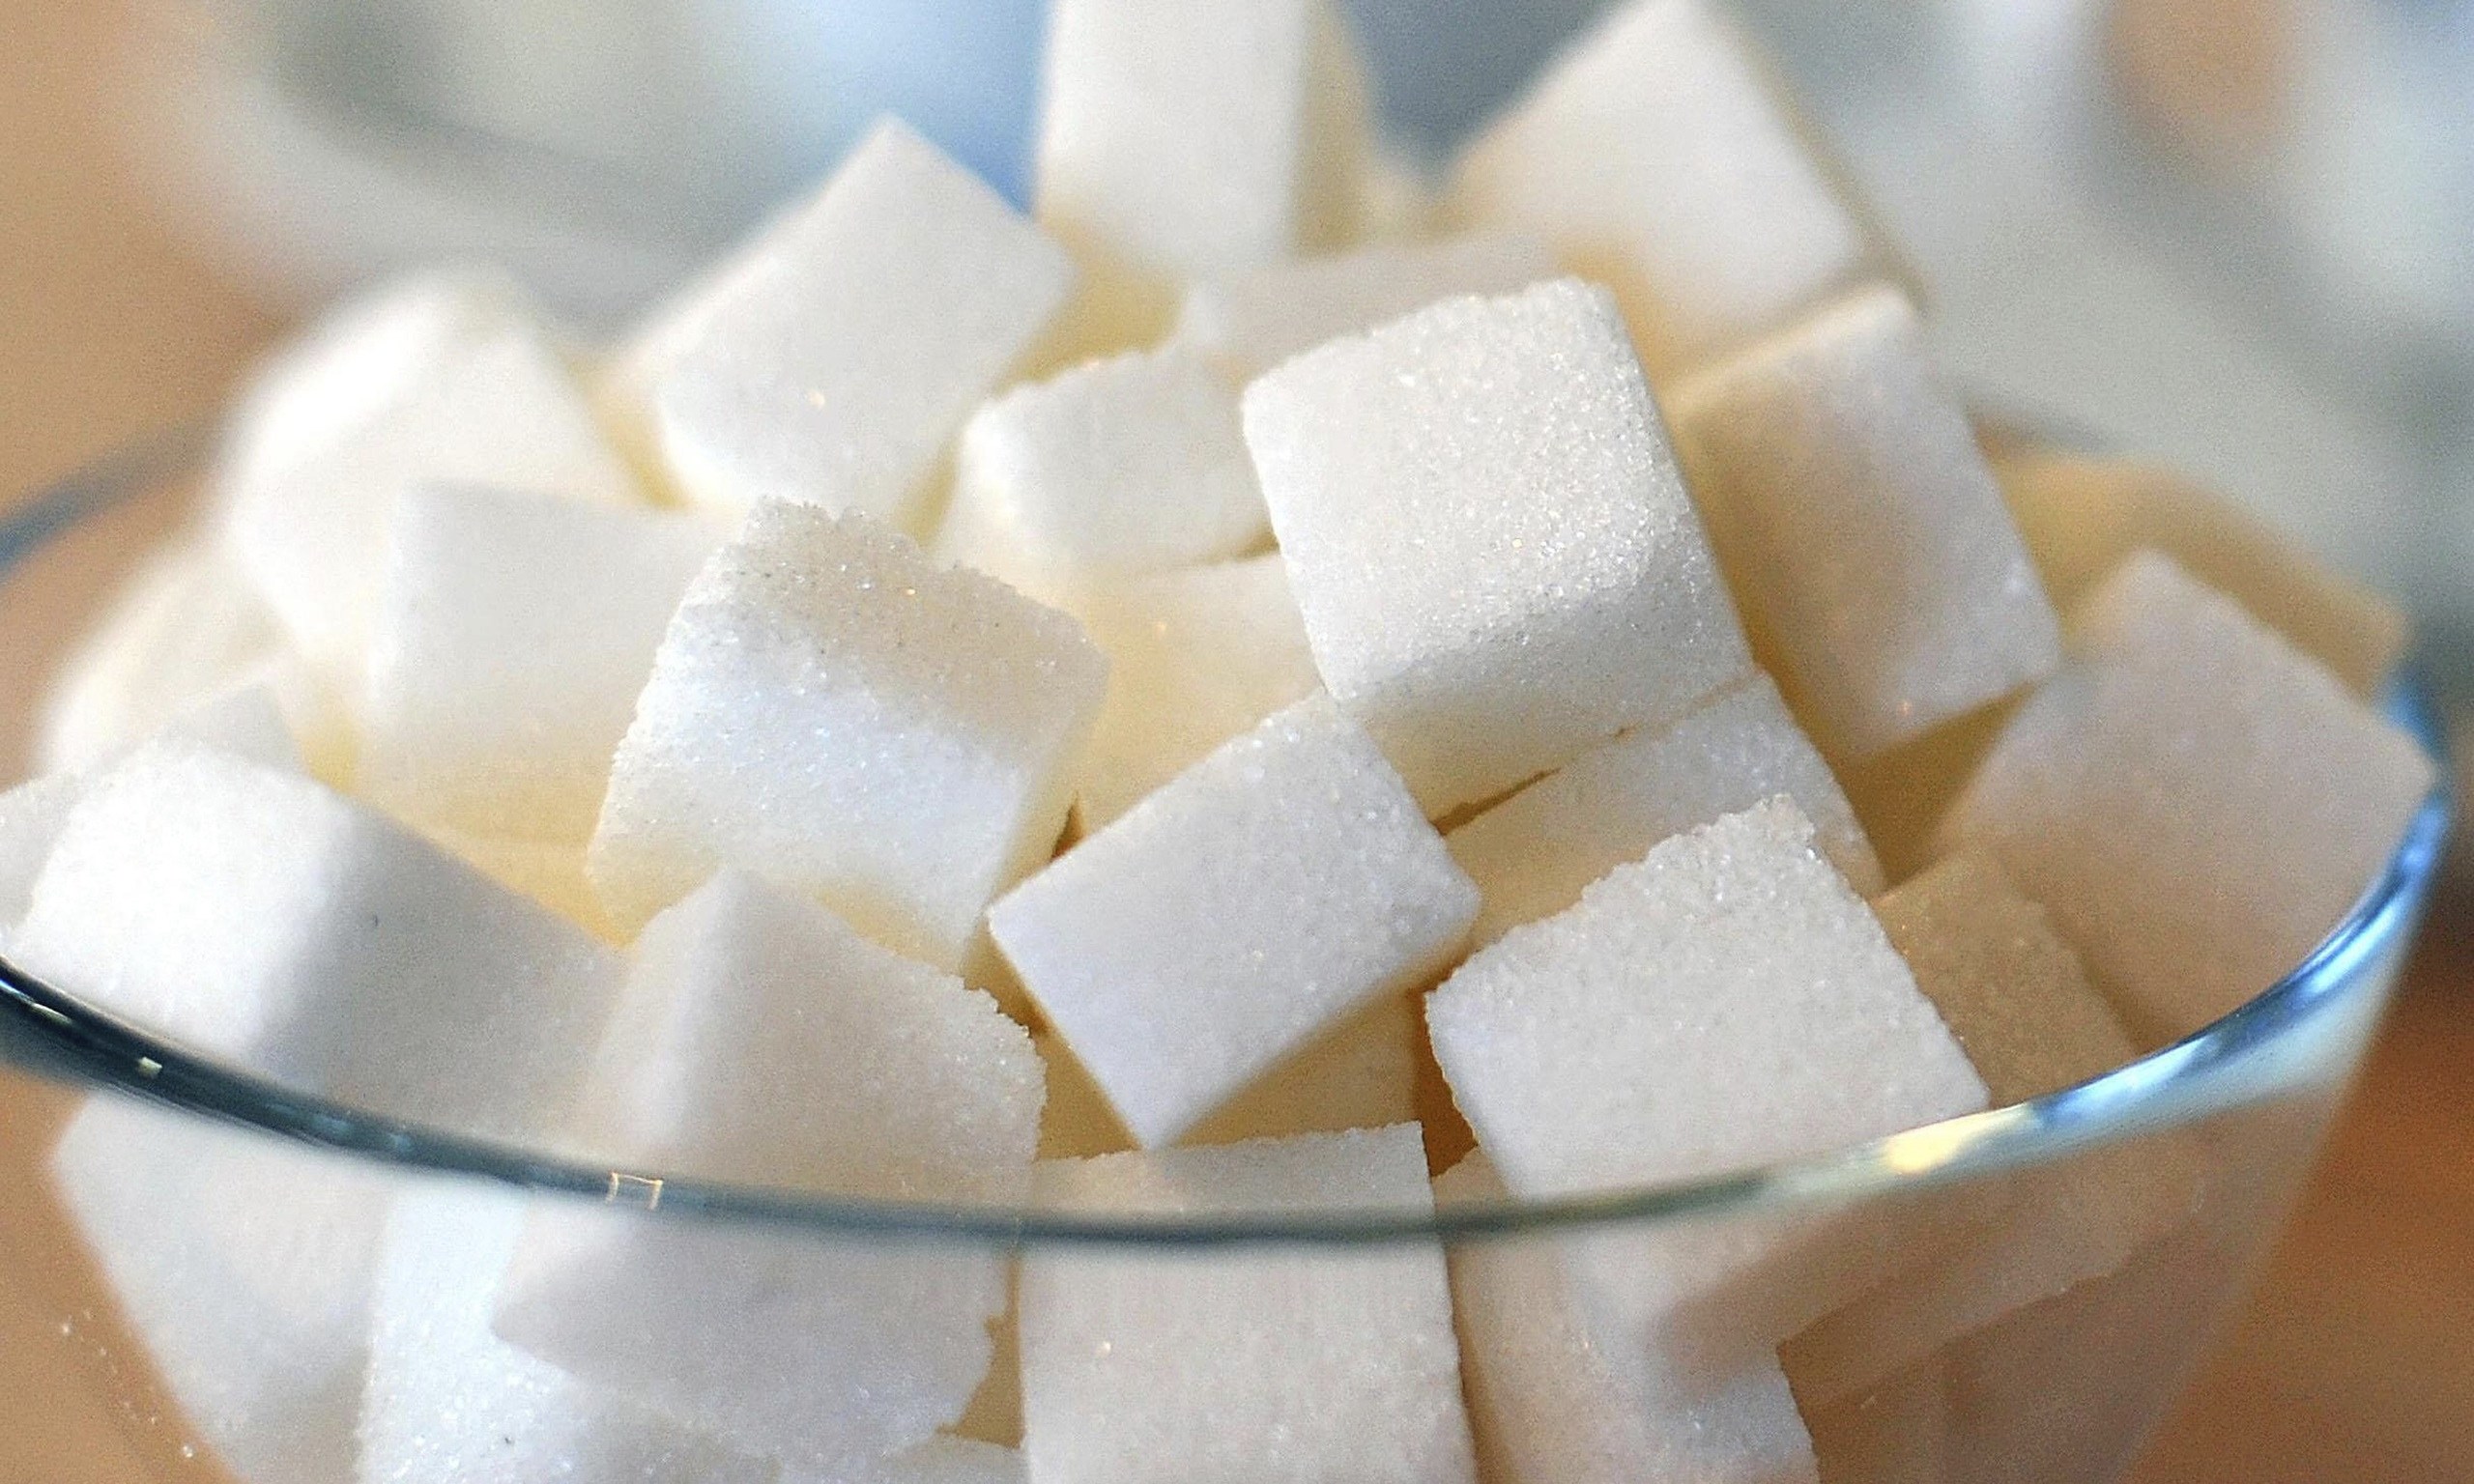 A glass bowl filled with white cubes of sugar.